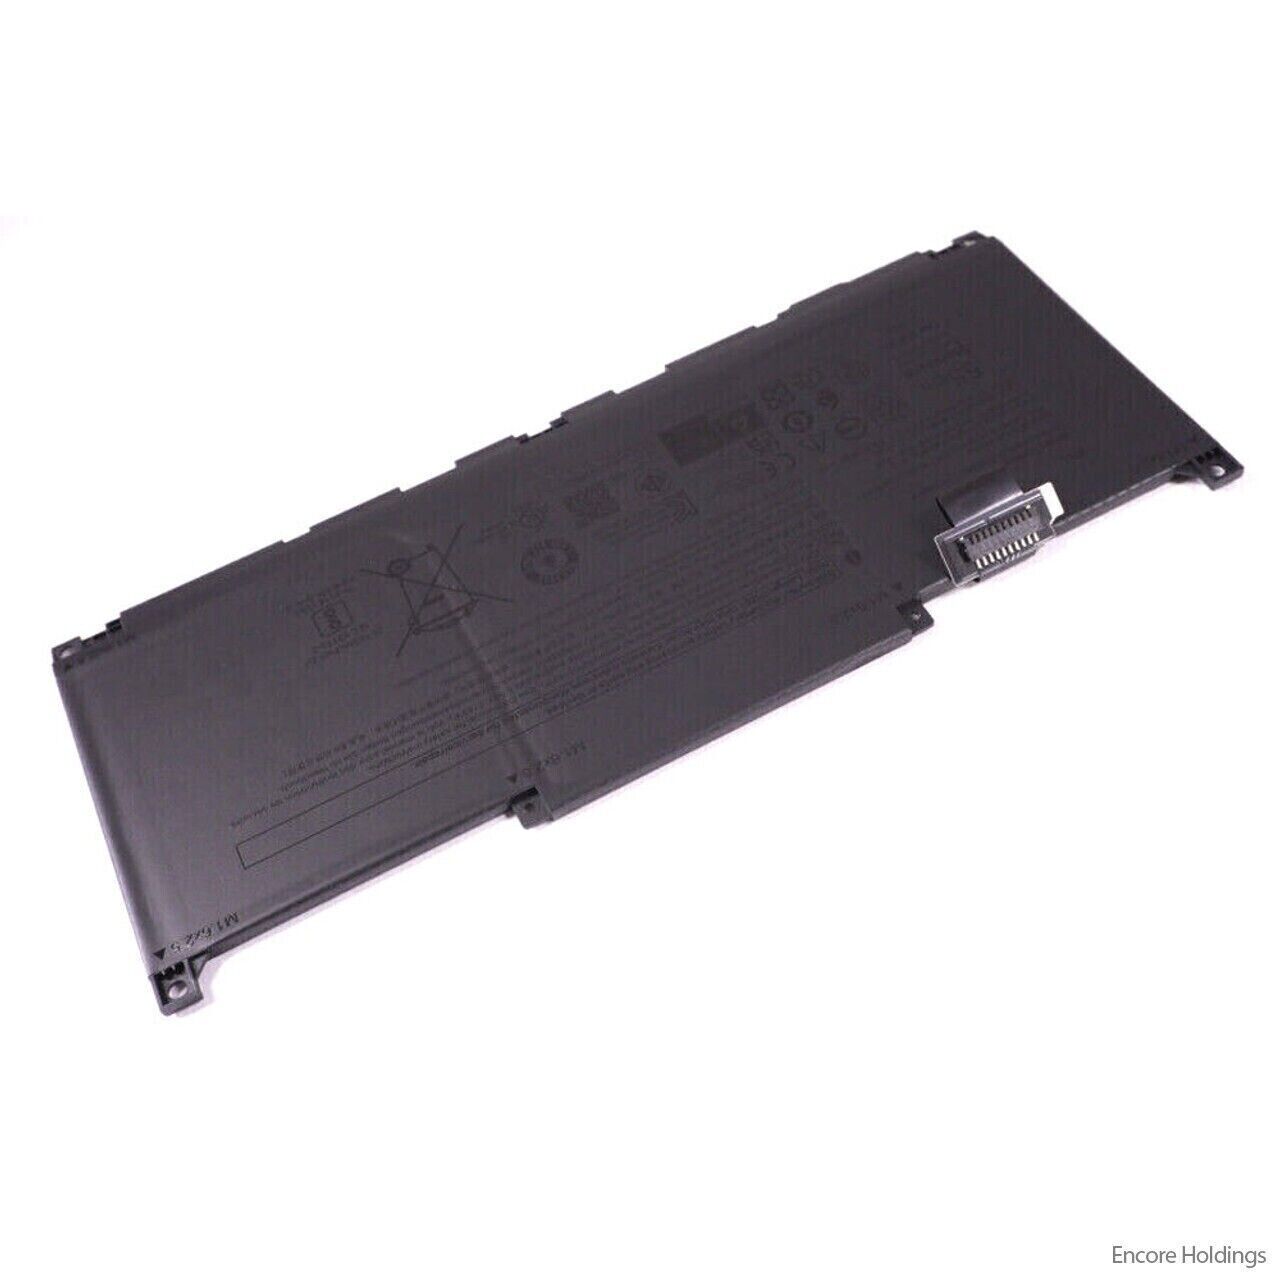 NEW GENIUNE Dell Battery For Dell XPS9320-7523BLK-PUS - 6-cell - MN79H